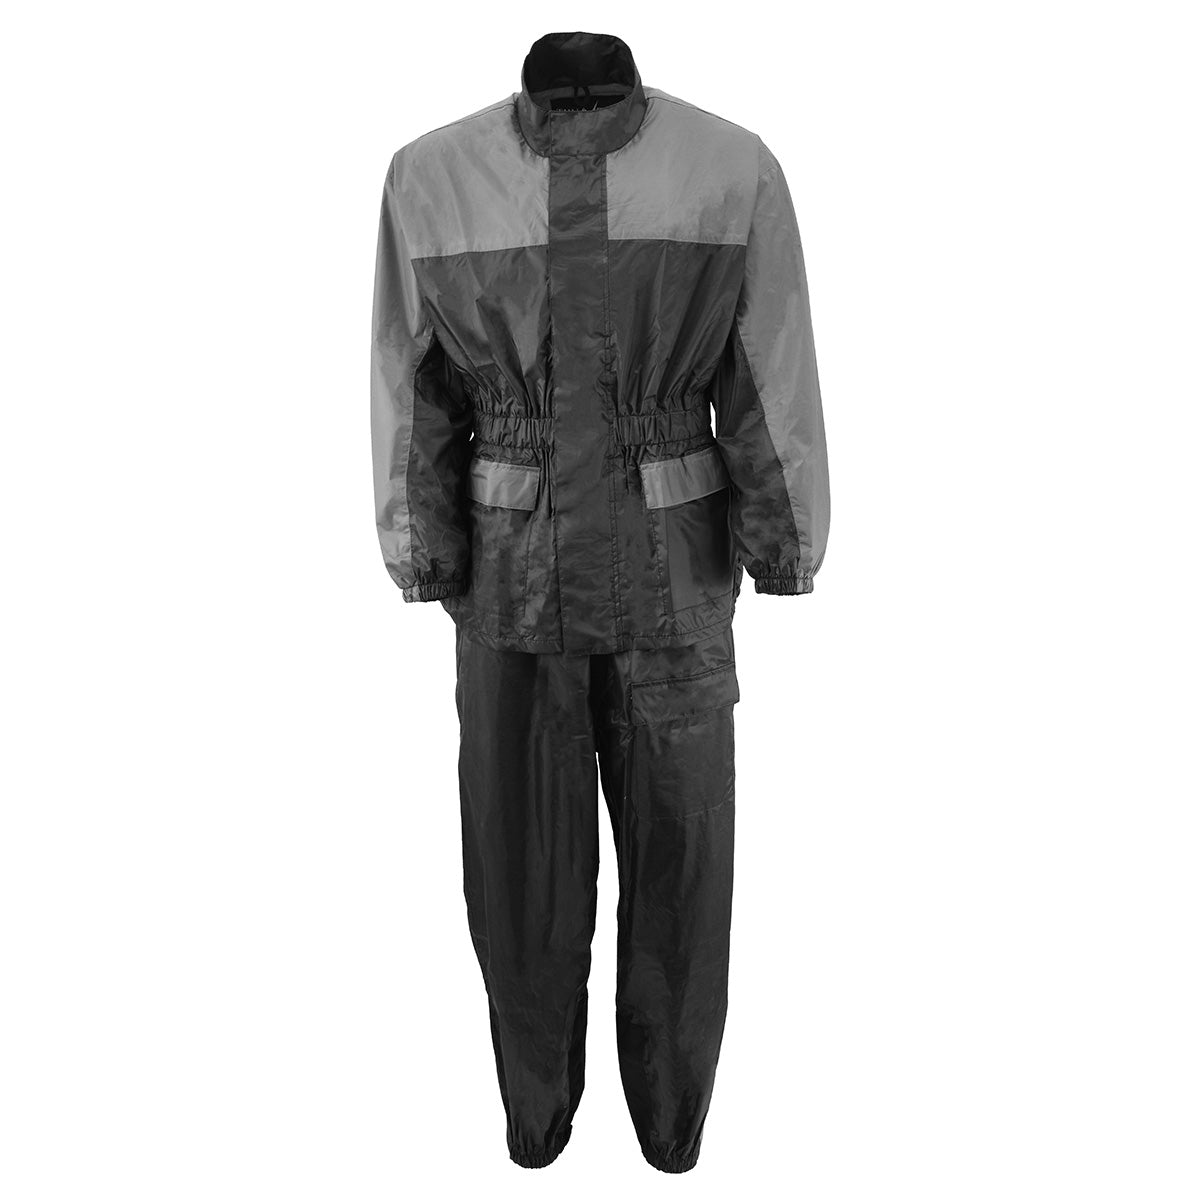 NexGen Ladies XS5031 Grey and Black Water Proof Rain Suit with Cinch Sides